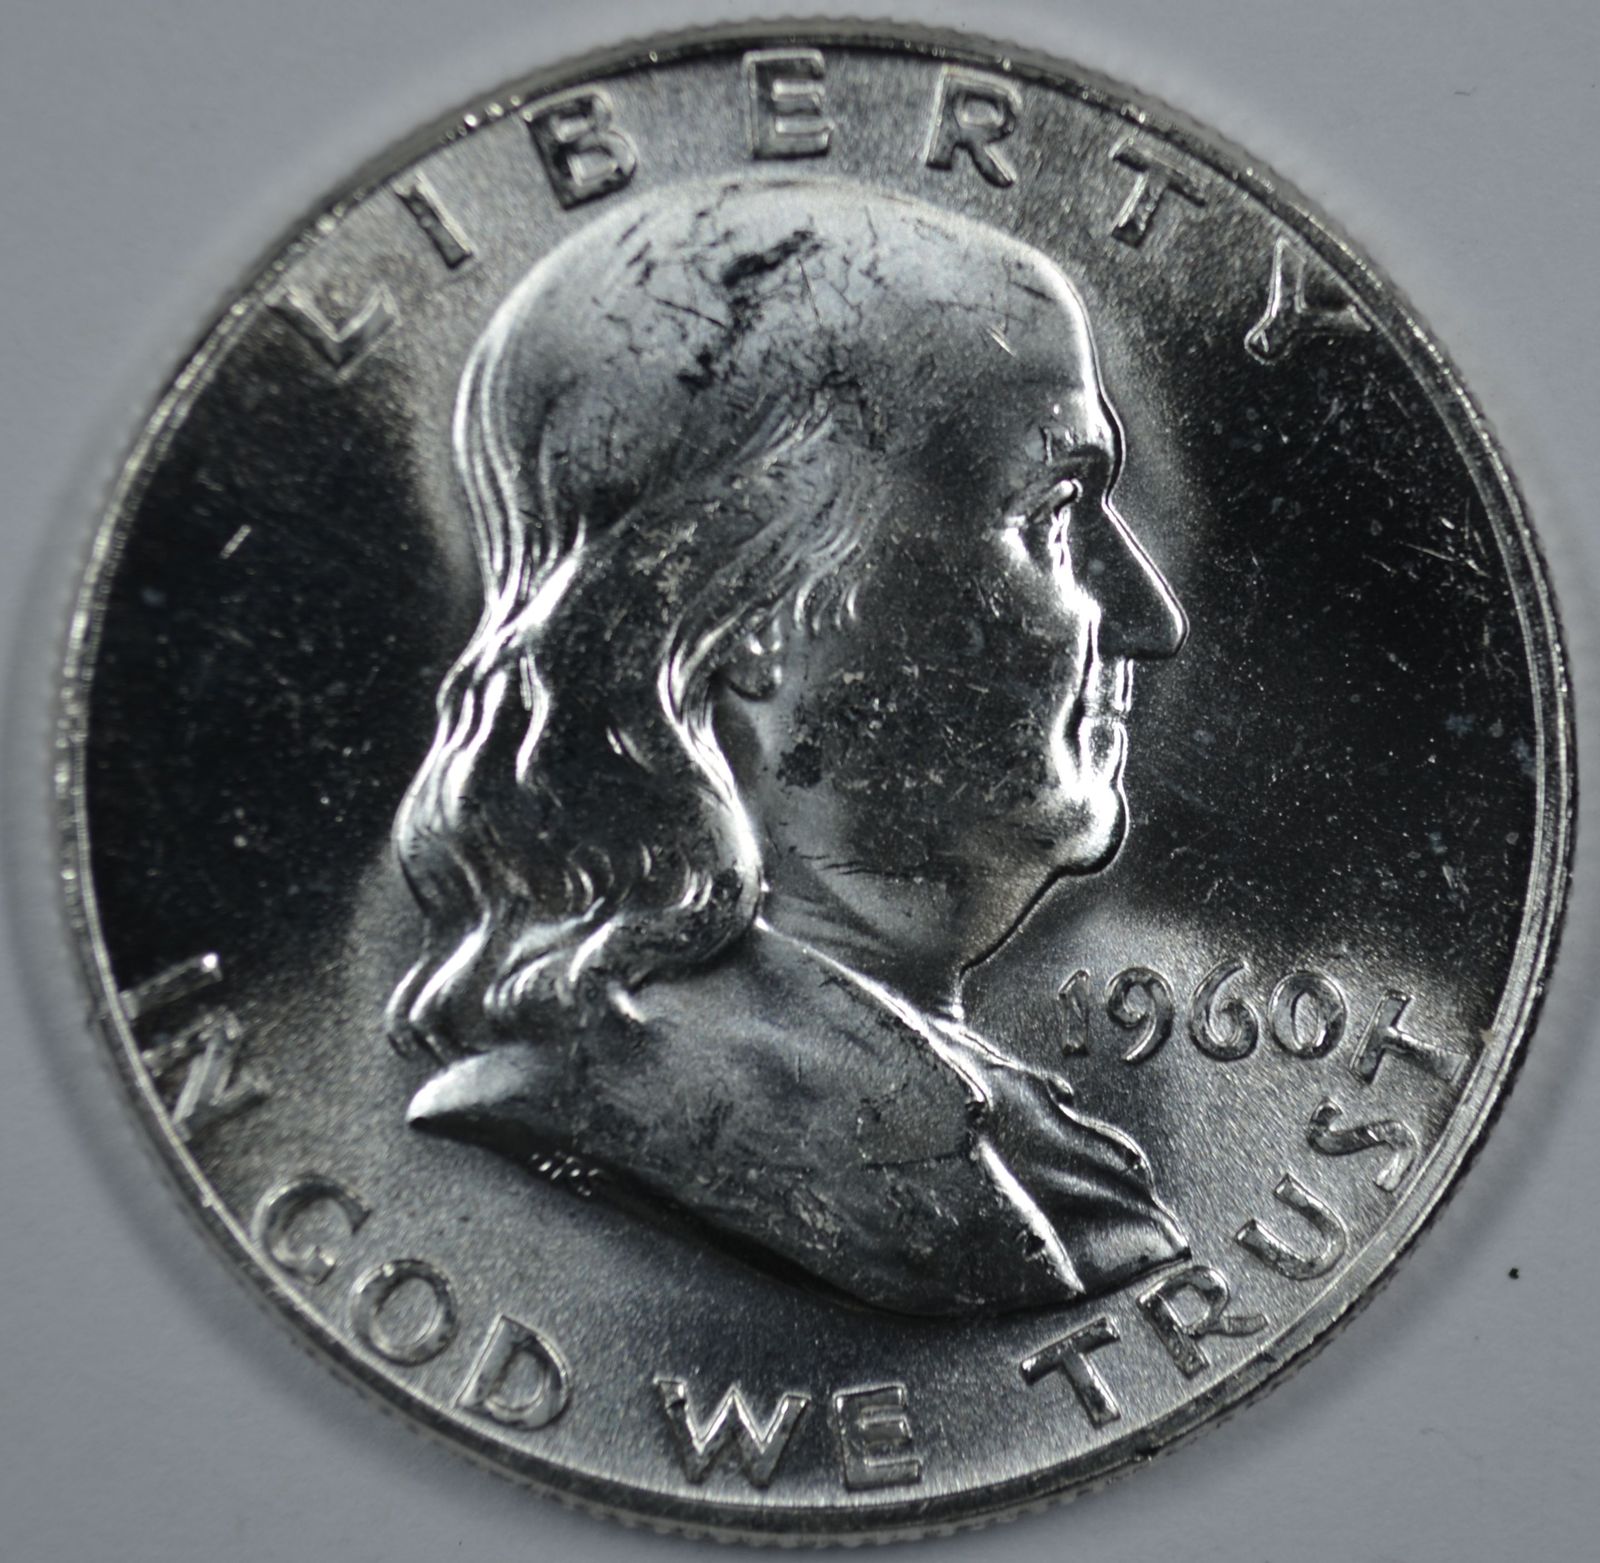 Primary image for 1960 P & D Franklin uncirculated silver half dollars